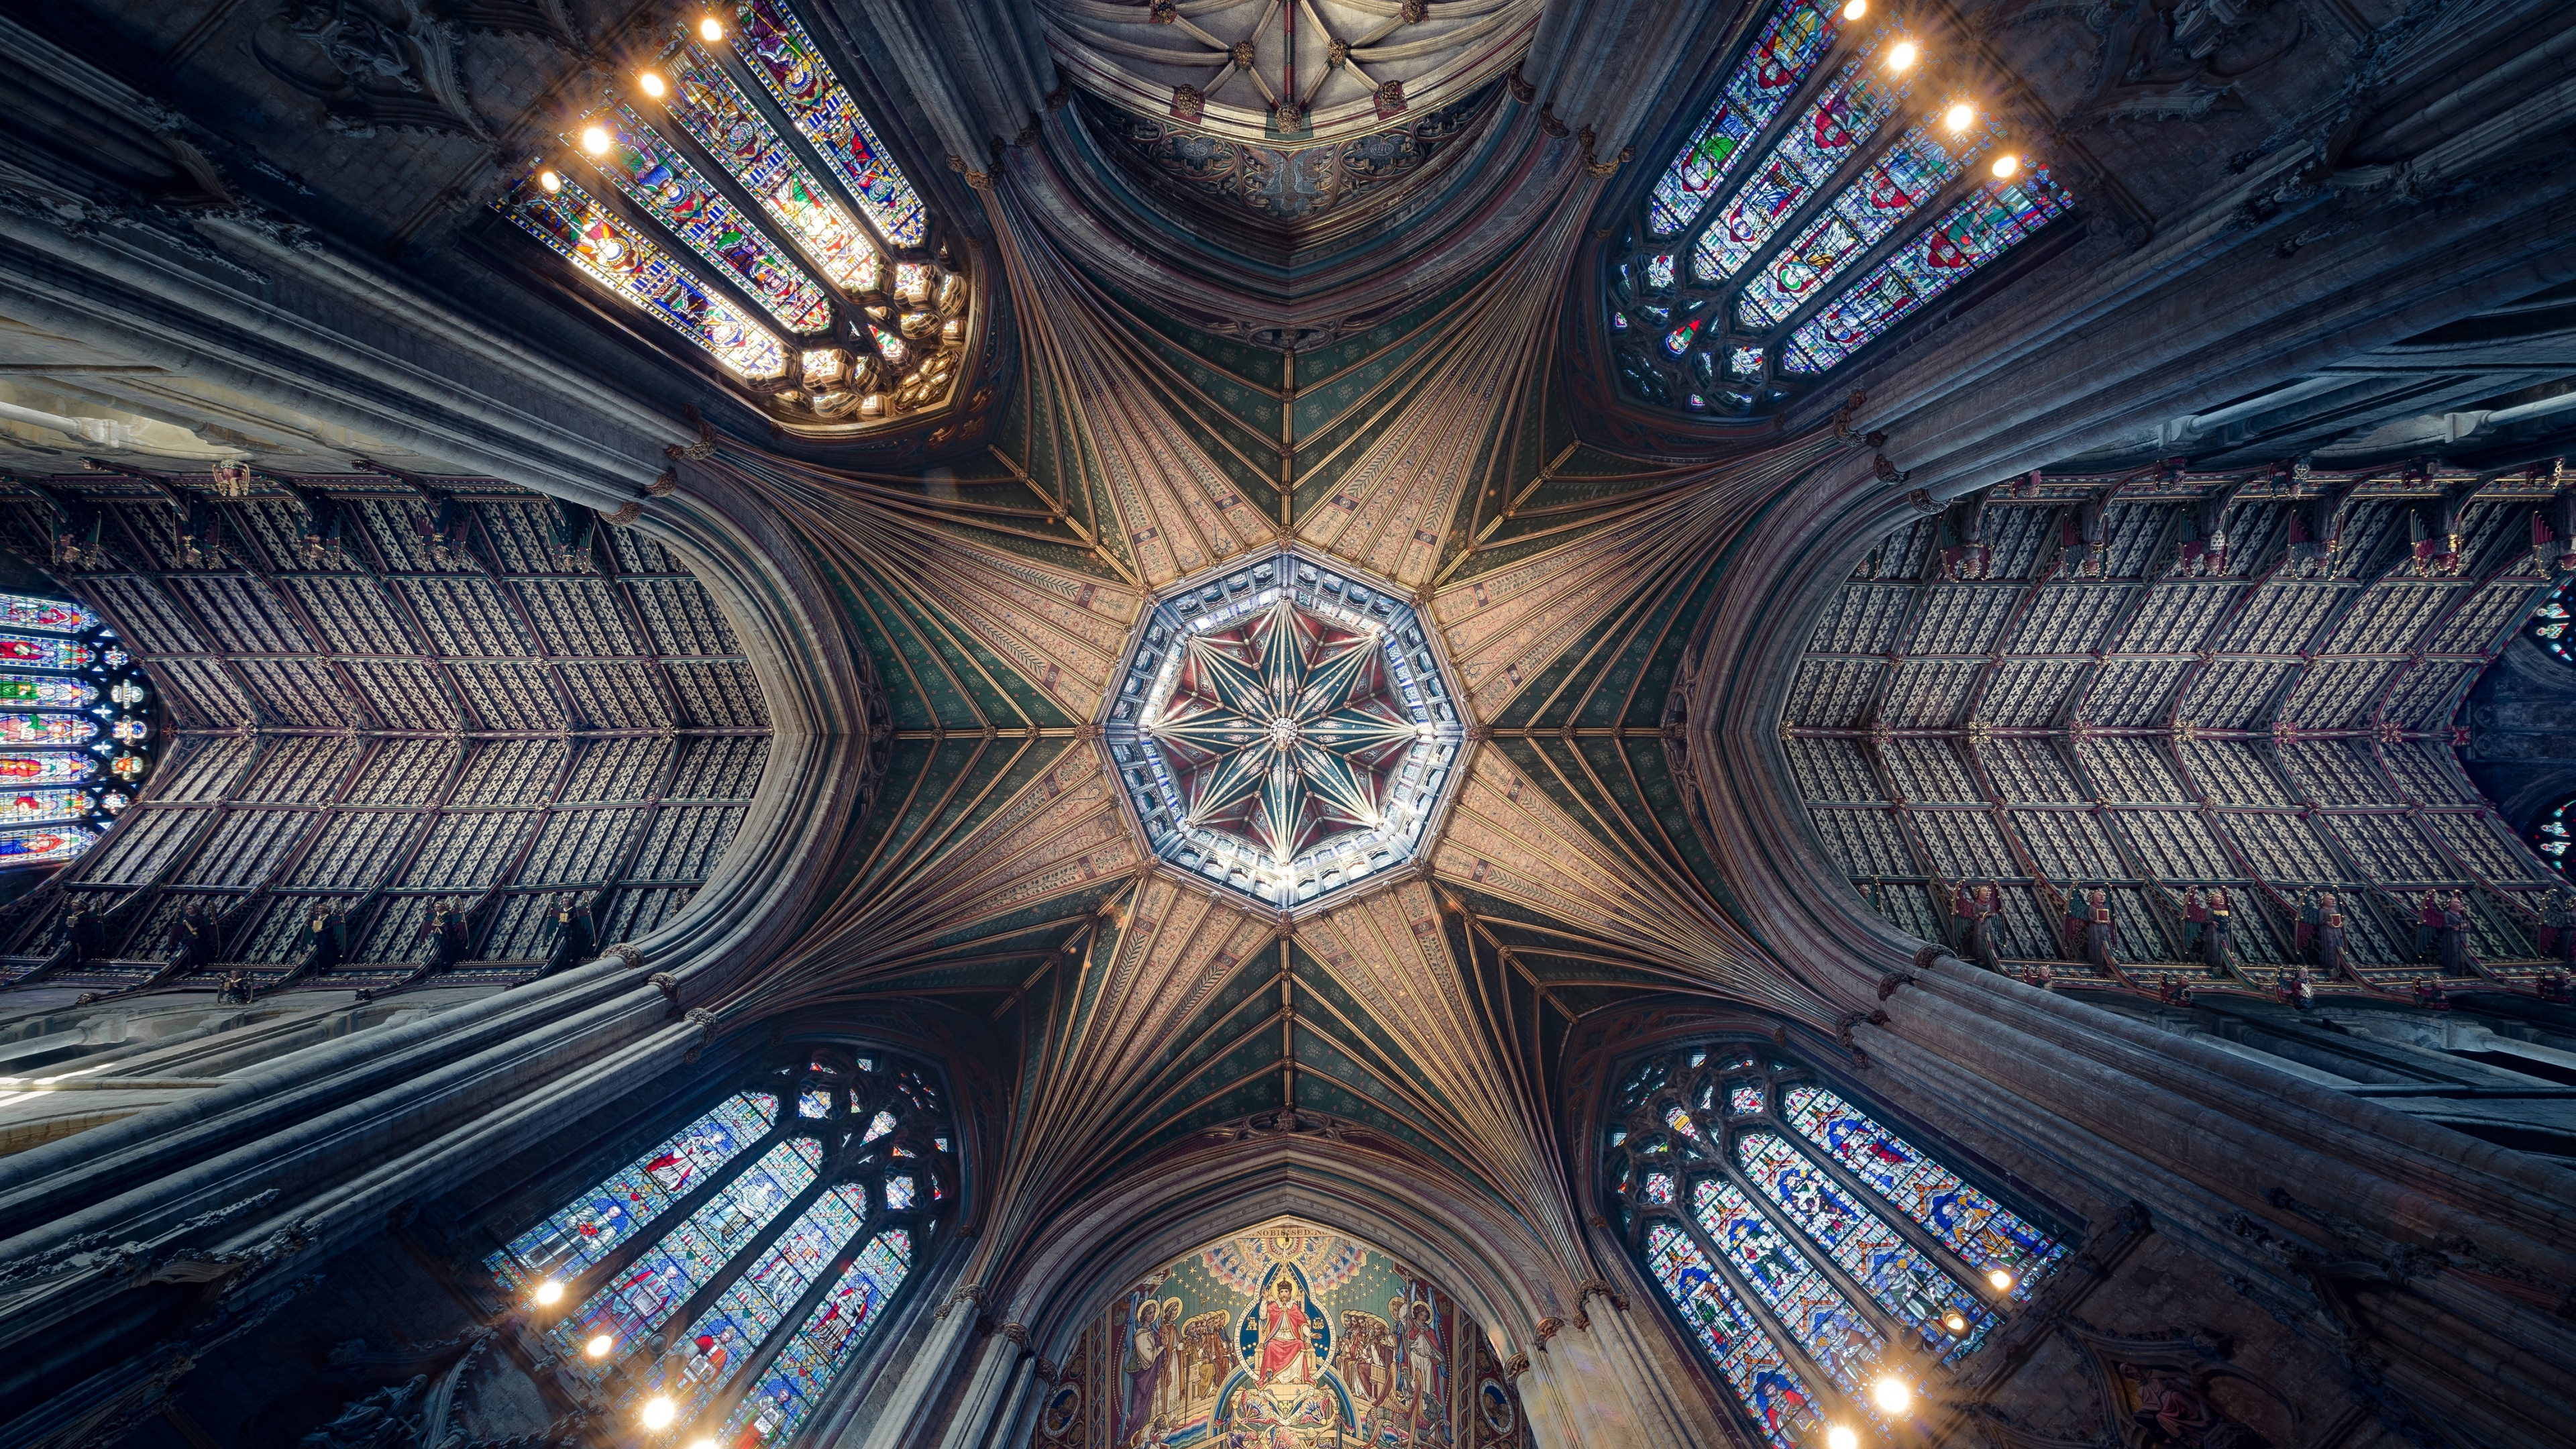 Download 3840x2160 ceiling, cathedral, symmetrical interior